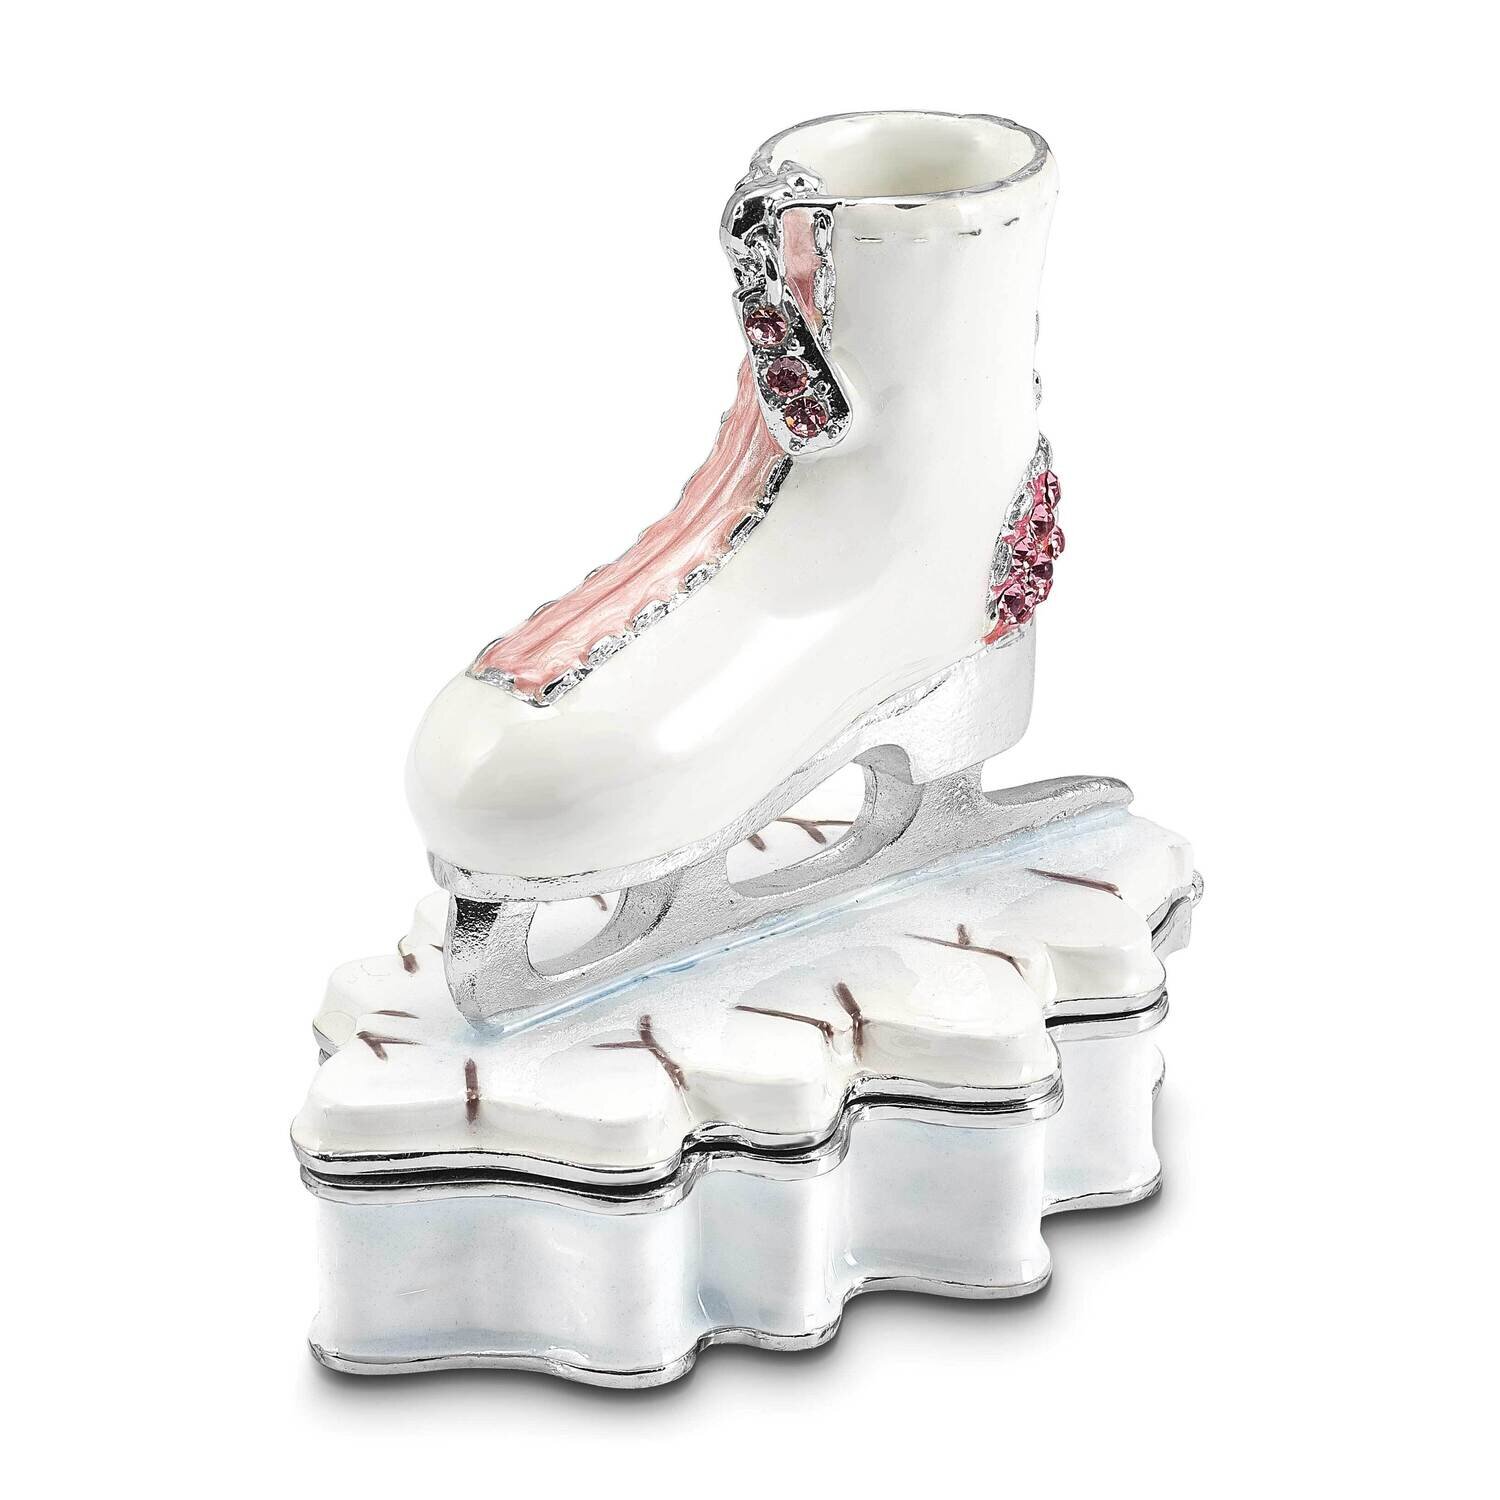 By Jere GLIDER Pink and White Ice Skate Trinket Box with Matching 18 Inch Necklace Pewter Bejeweled Crystals Silver-tone Enameled BJ4117